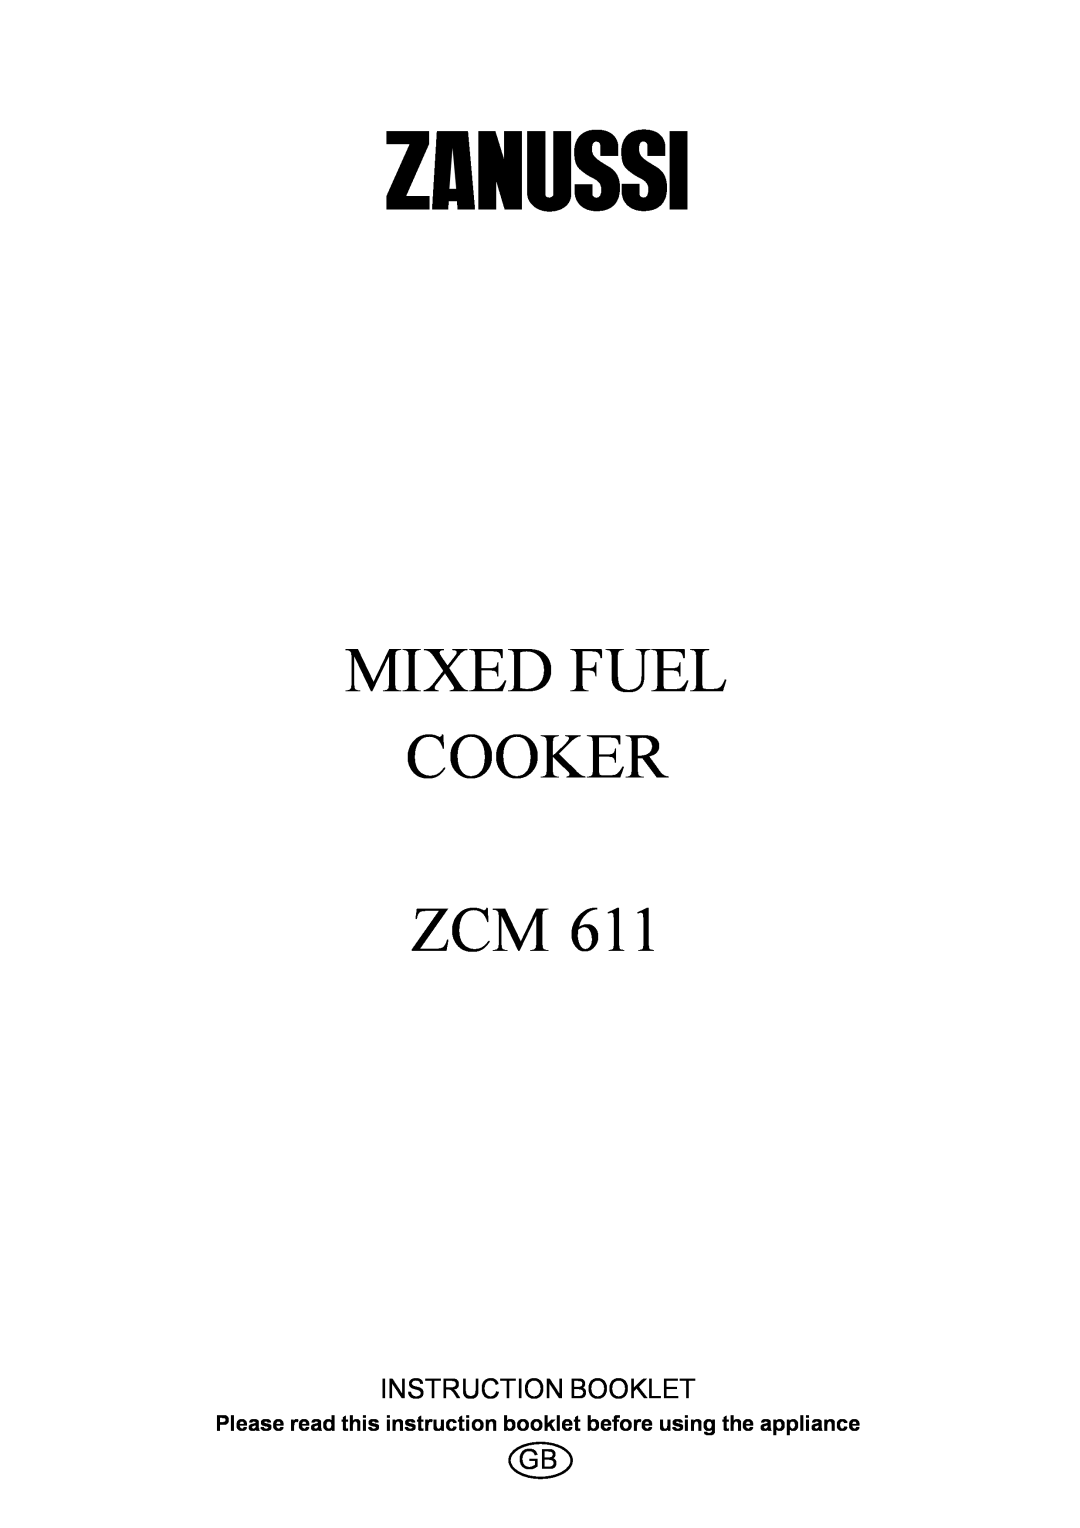 Zanussi ZCM 611 manual Instruction Booklet, Mixed Fuel Cooker Zcm 